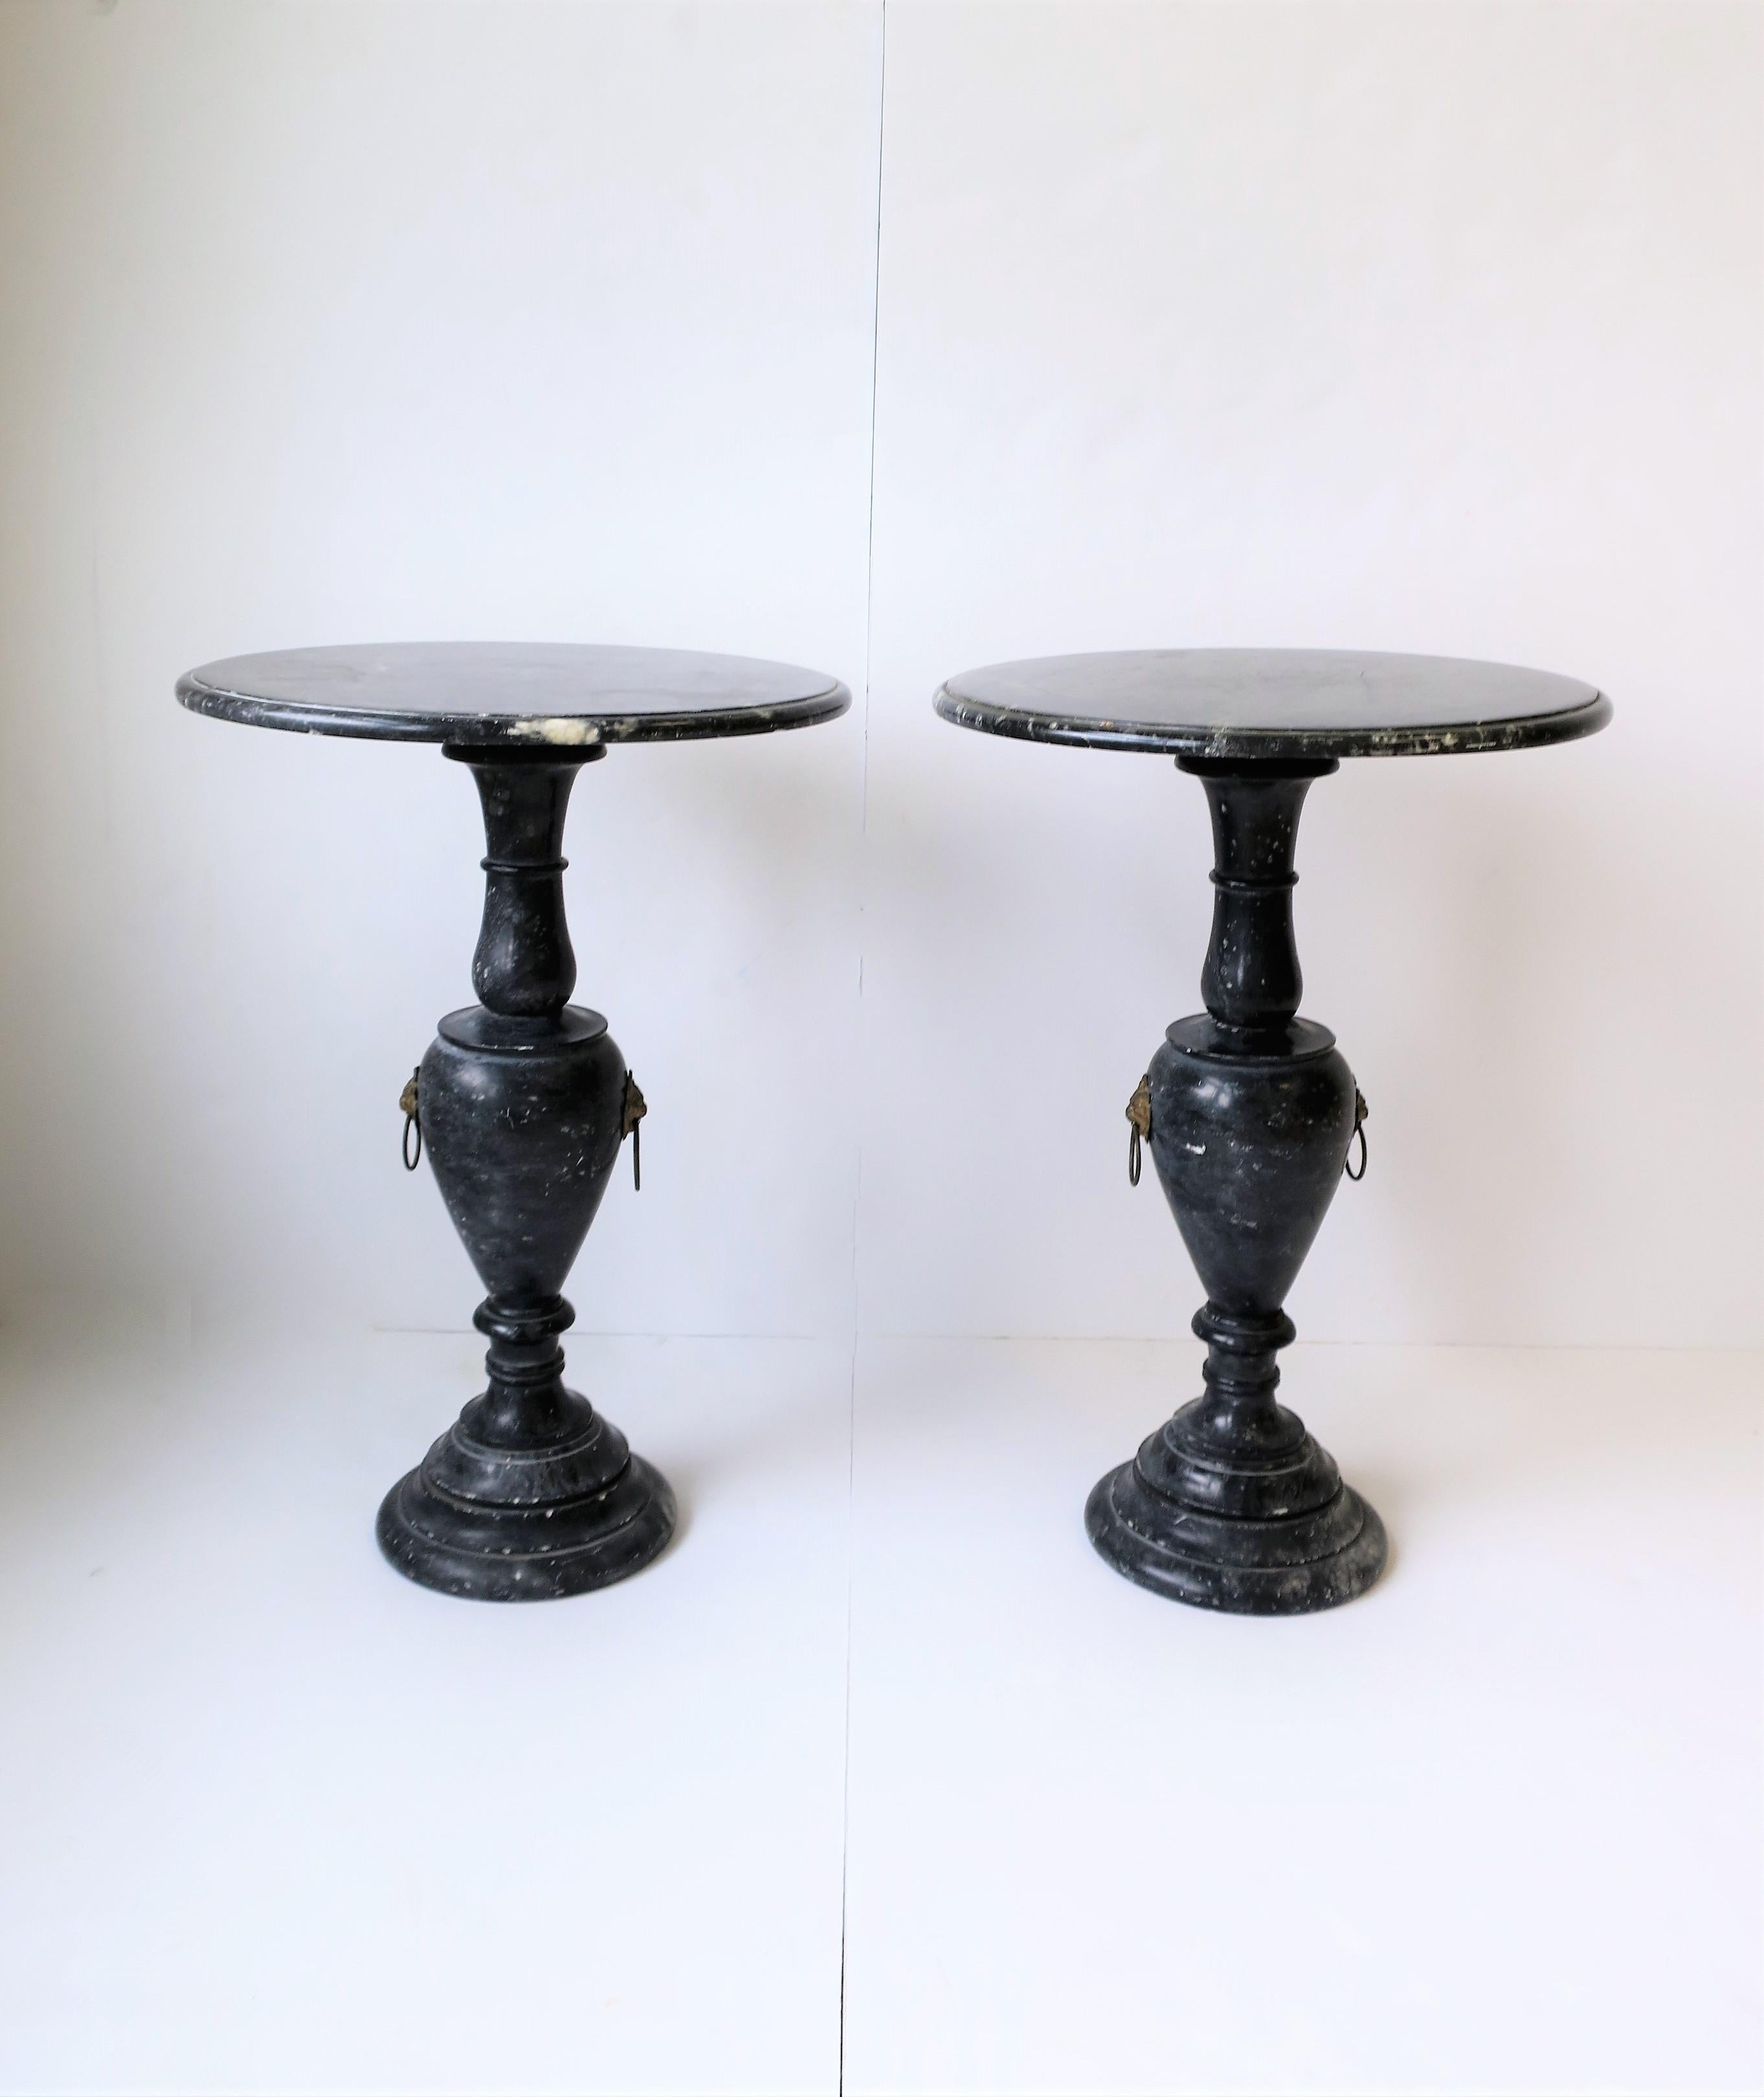 Regency Italian Black and White Marble Round Side Tables